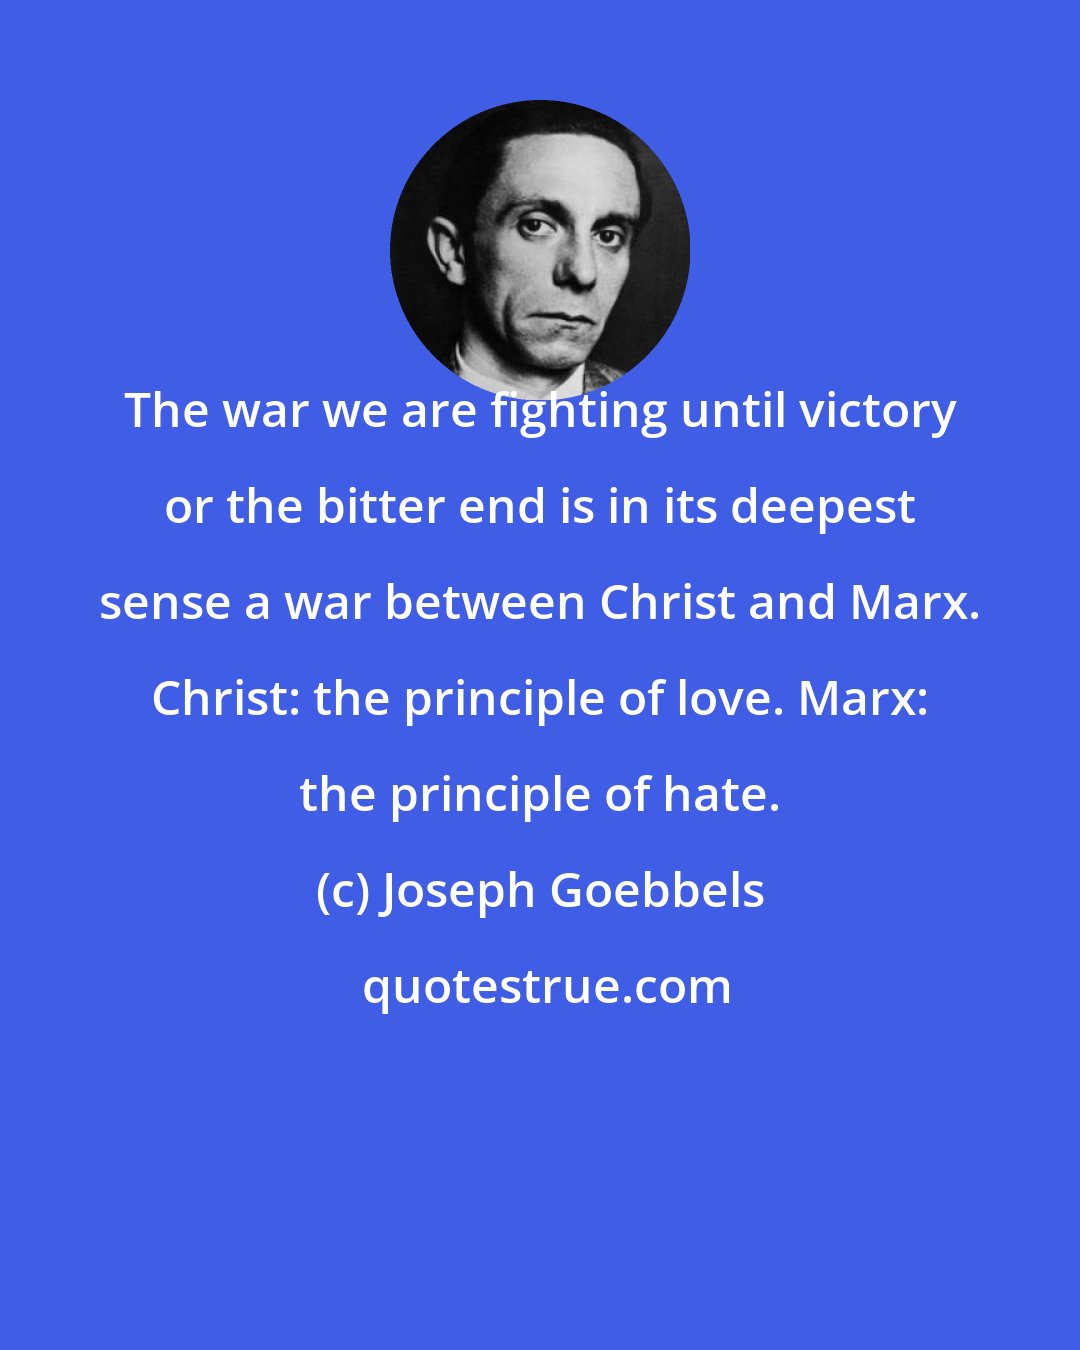 Joseph Goebbels: The war we are fighting until victory or the bitter end is in its deepest sense a war between Christ and Marx. Christ: the principle of love. Marx: the principle of hate.